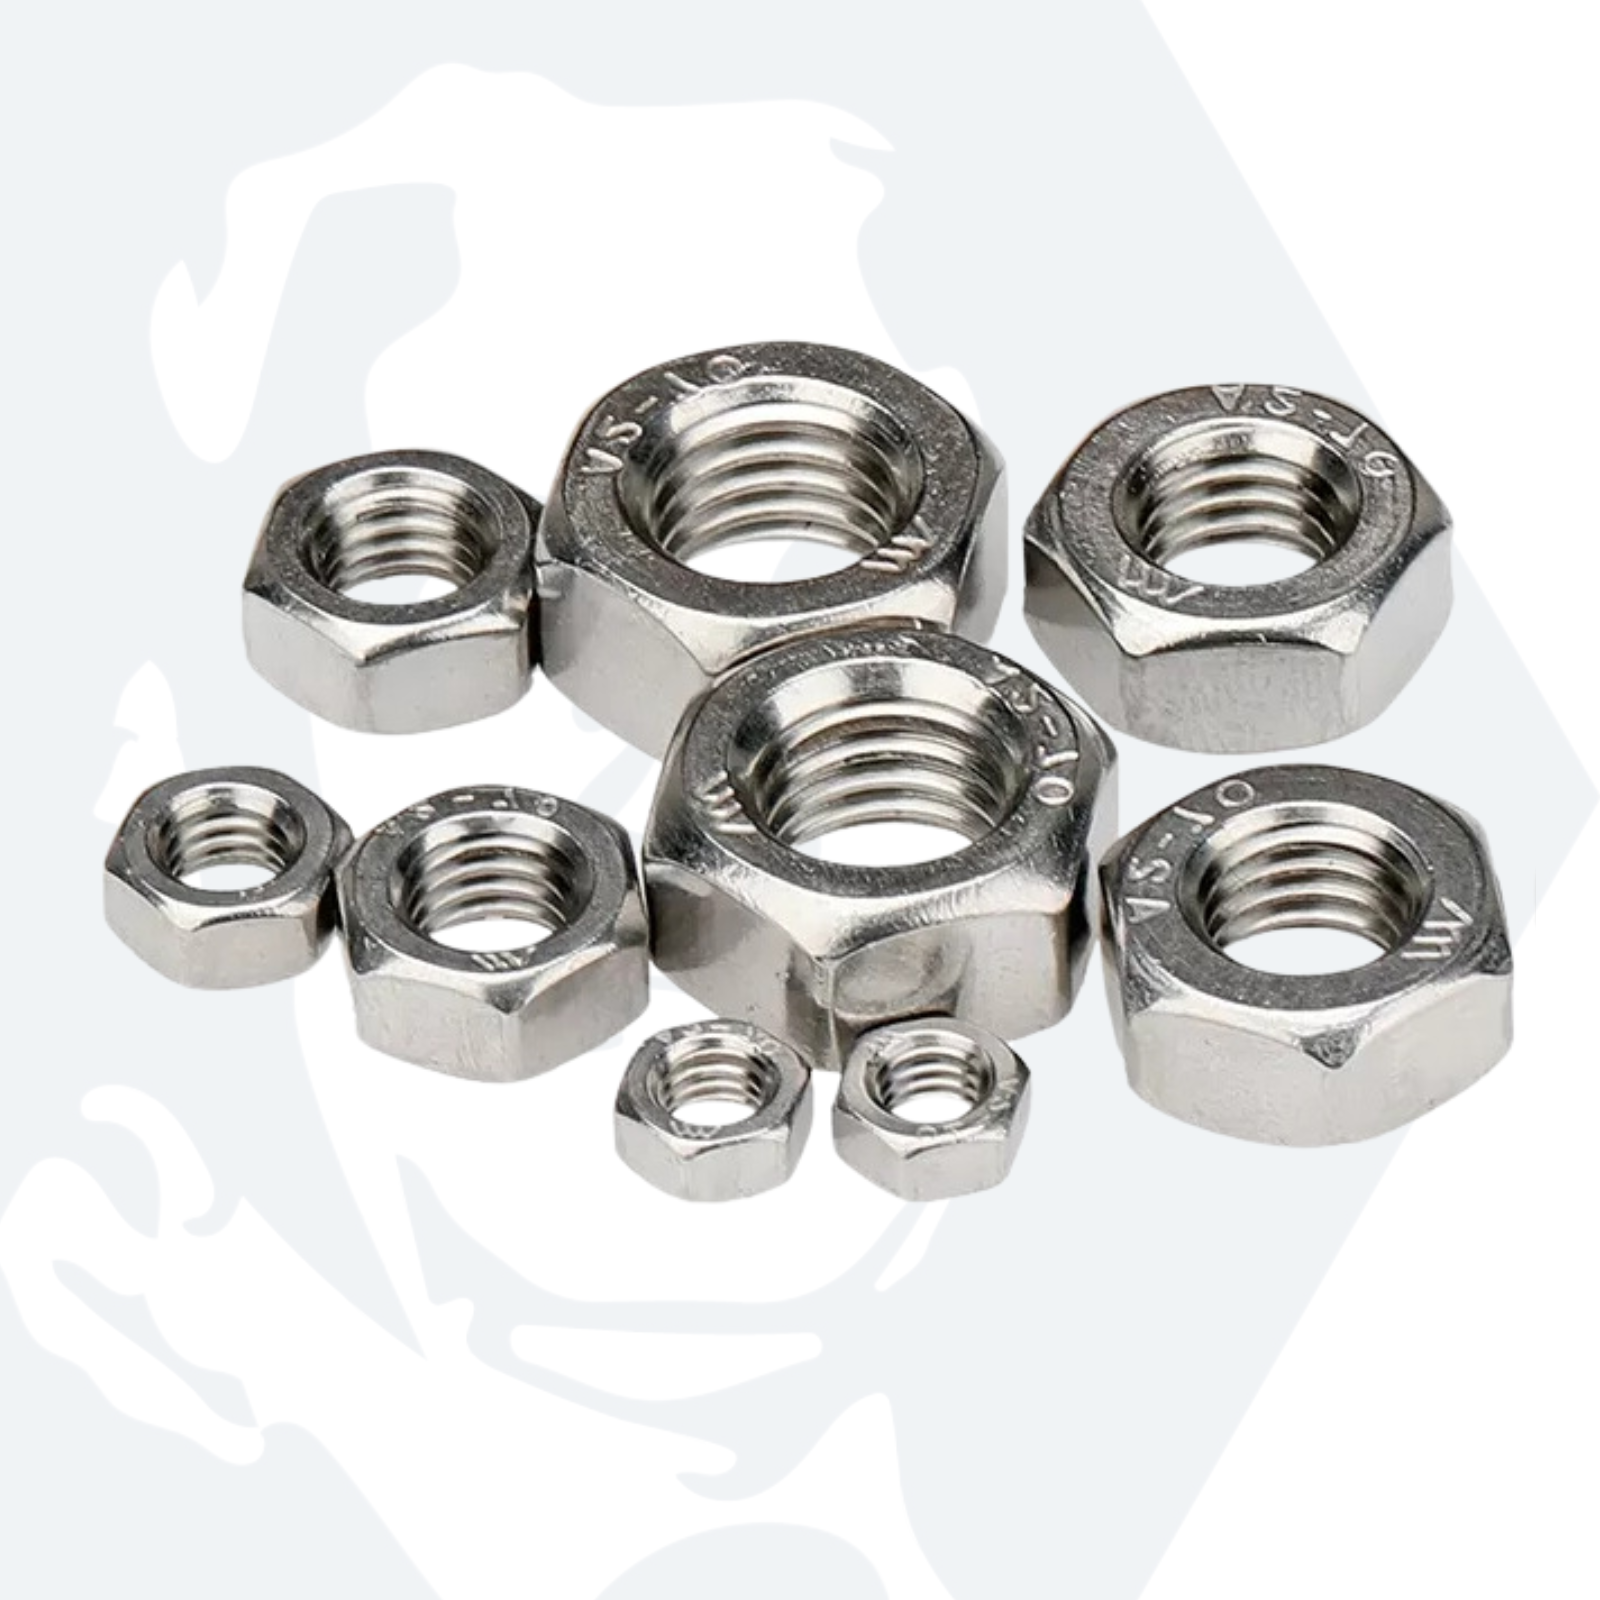 M4 Hexagon Nuts (DIN 934) - Stainless Steel (A4)